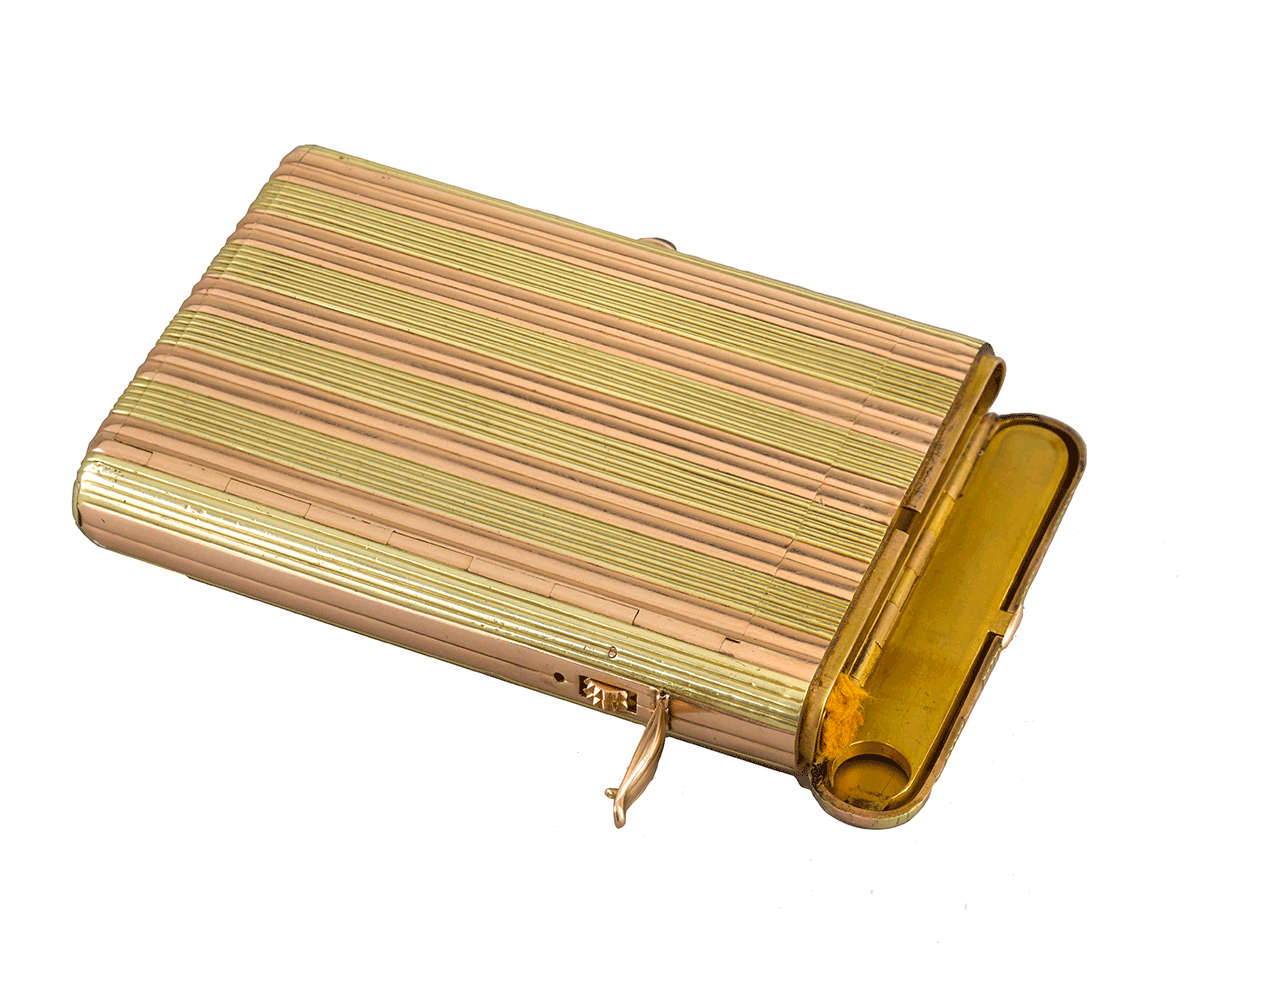 A rare Fabergé jewelled gold cigarette case, Moscow, 1899-1908, Russian  Works of Art, Fabergé & Icons, 2021